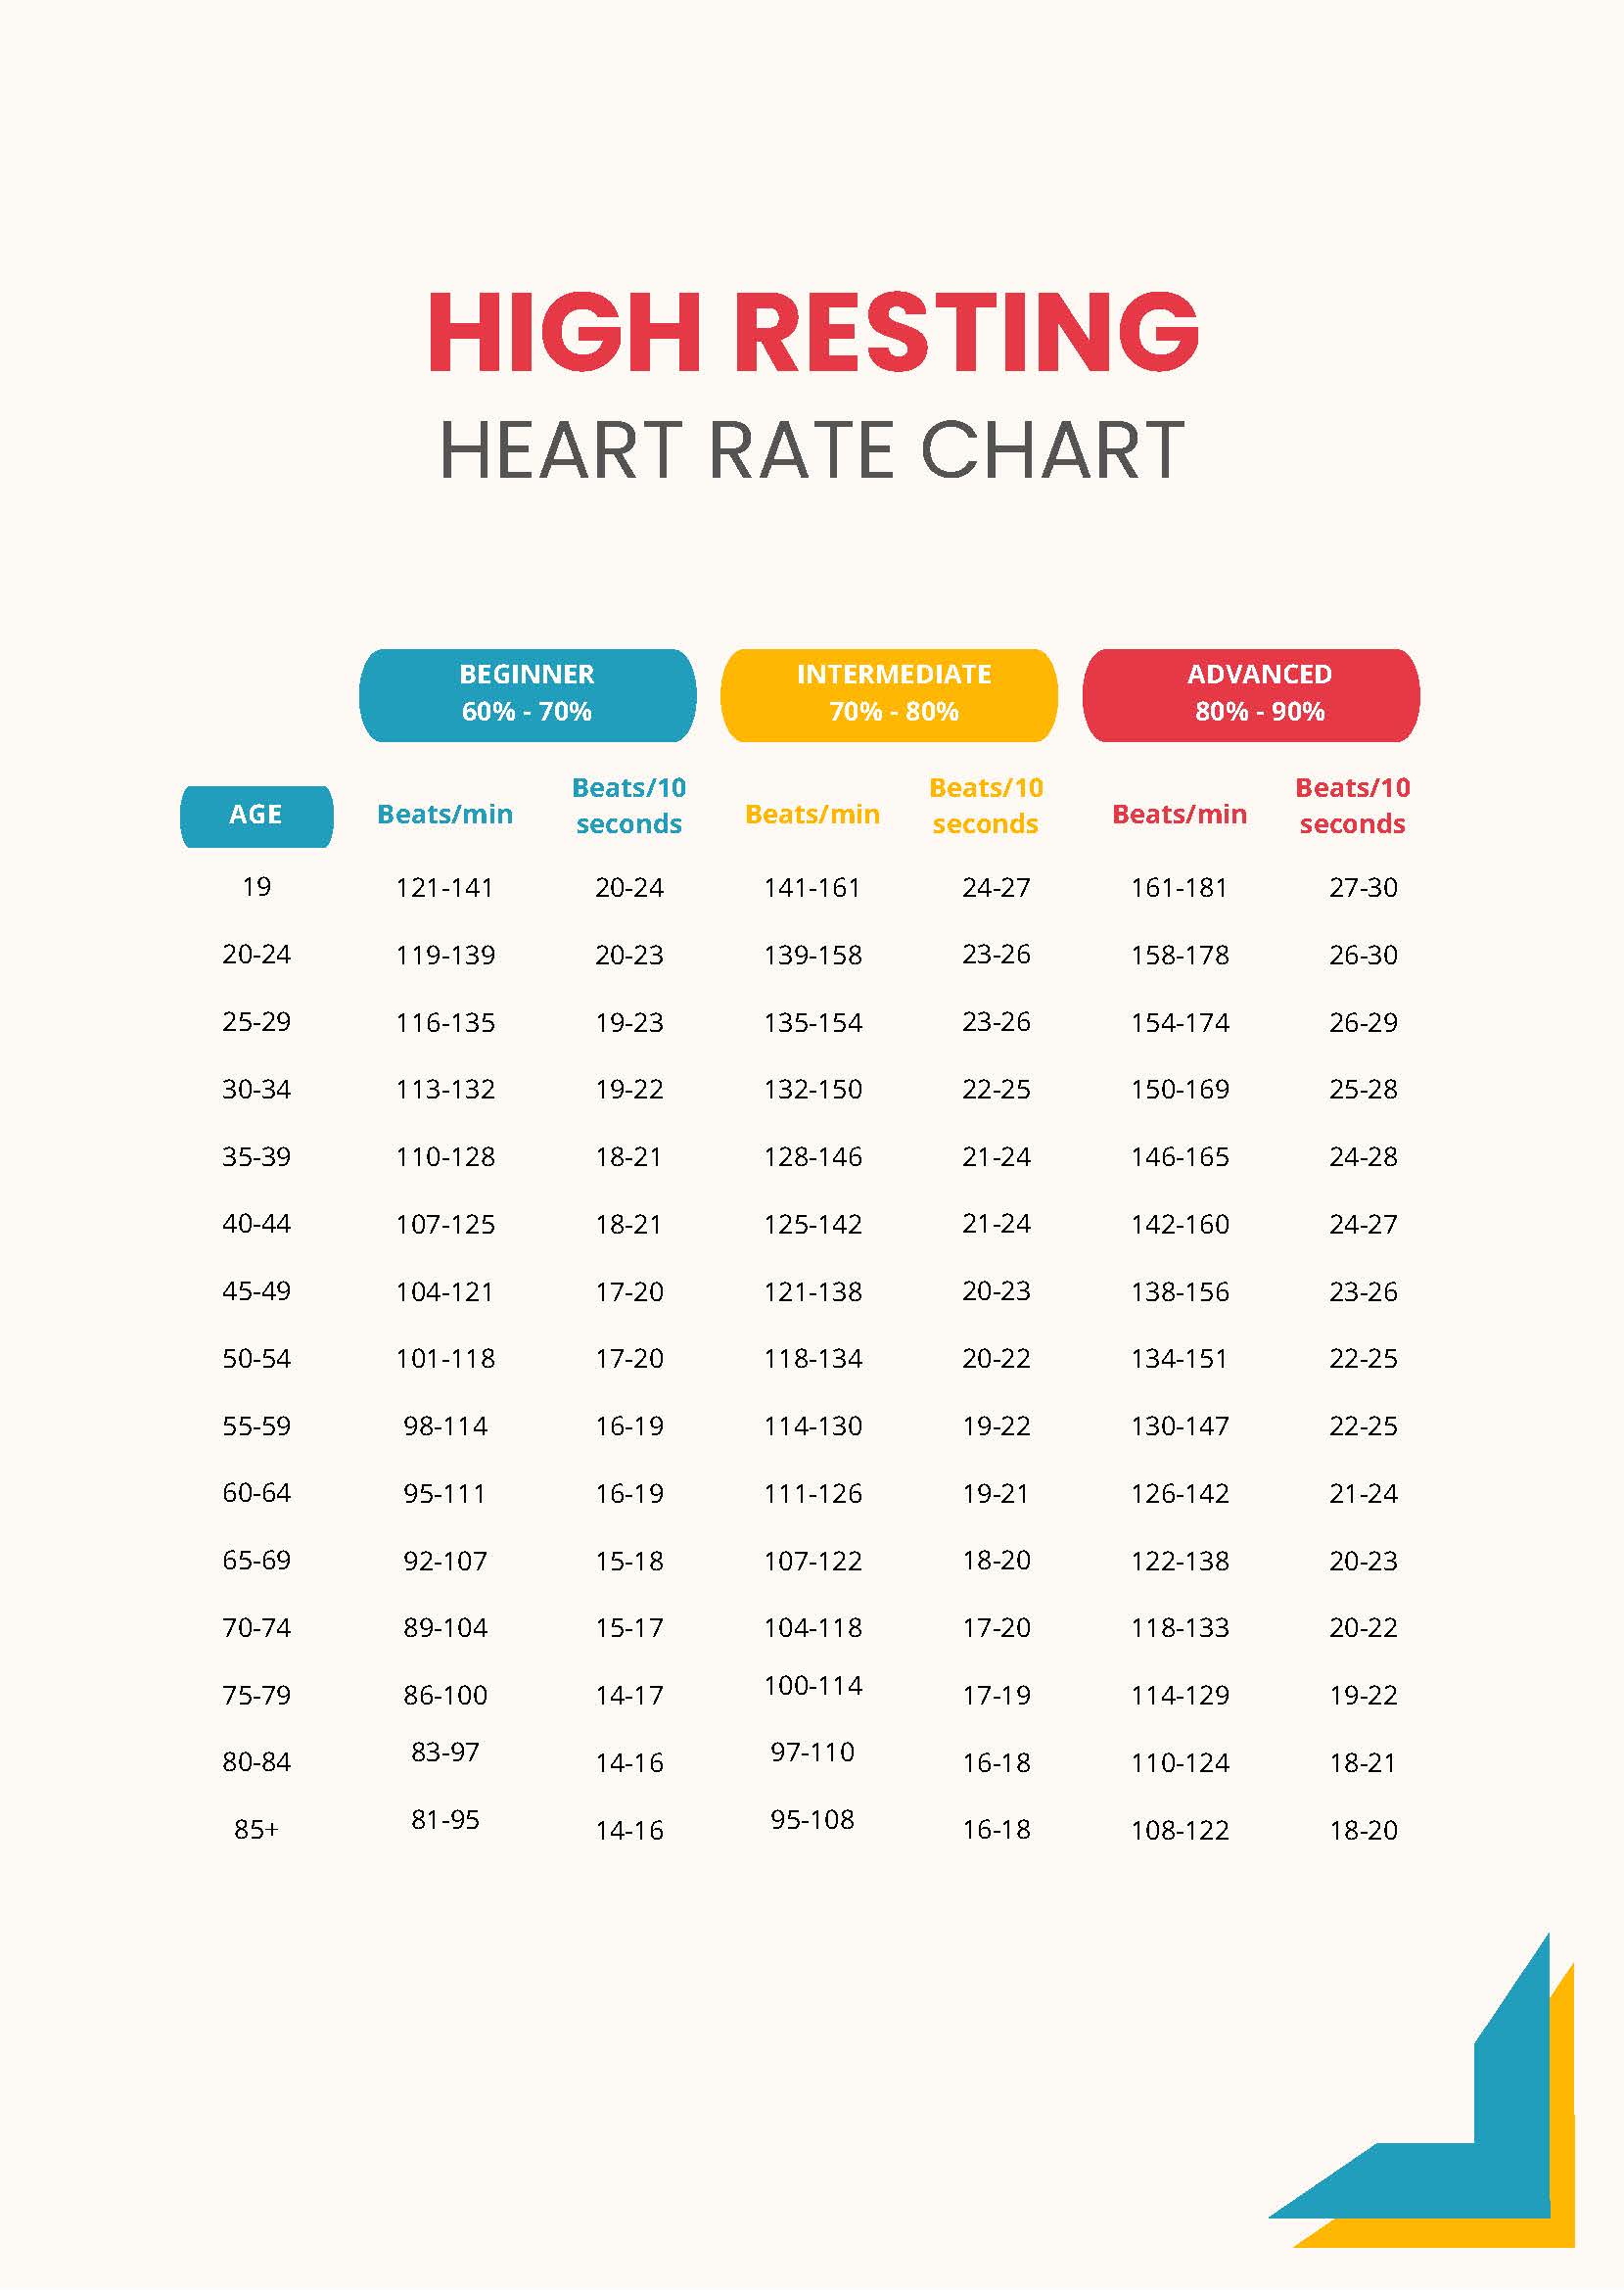 High Resting Heart Rate Chart in PDF